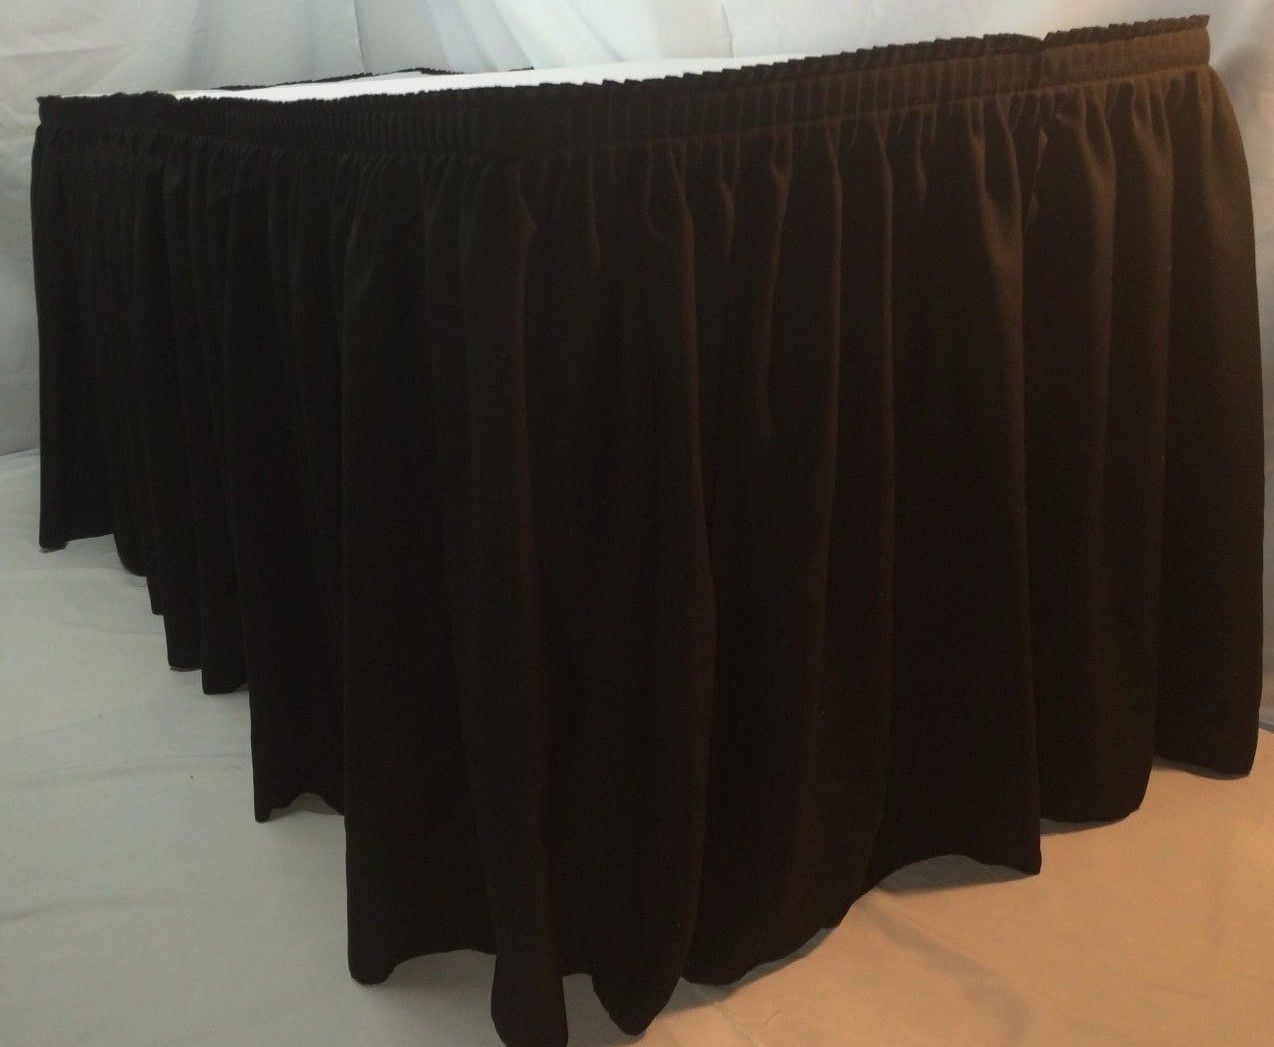 Trimming Shop Black 14 Feet Pleated Rectangle Polyester Table Skirt for Wedding Parties Catering Event Decoration Banquet Tablewear Birthday 1 piece 